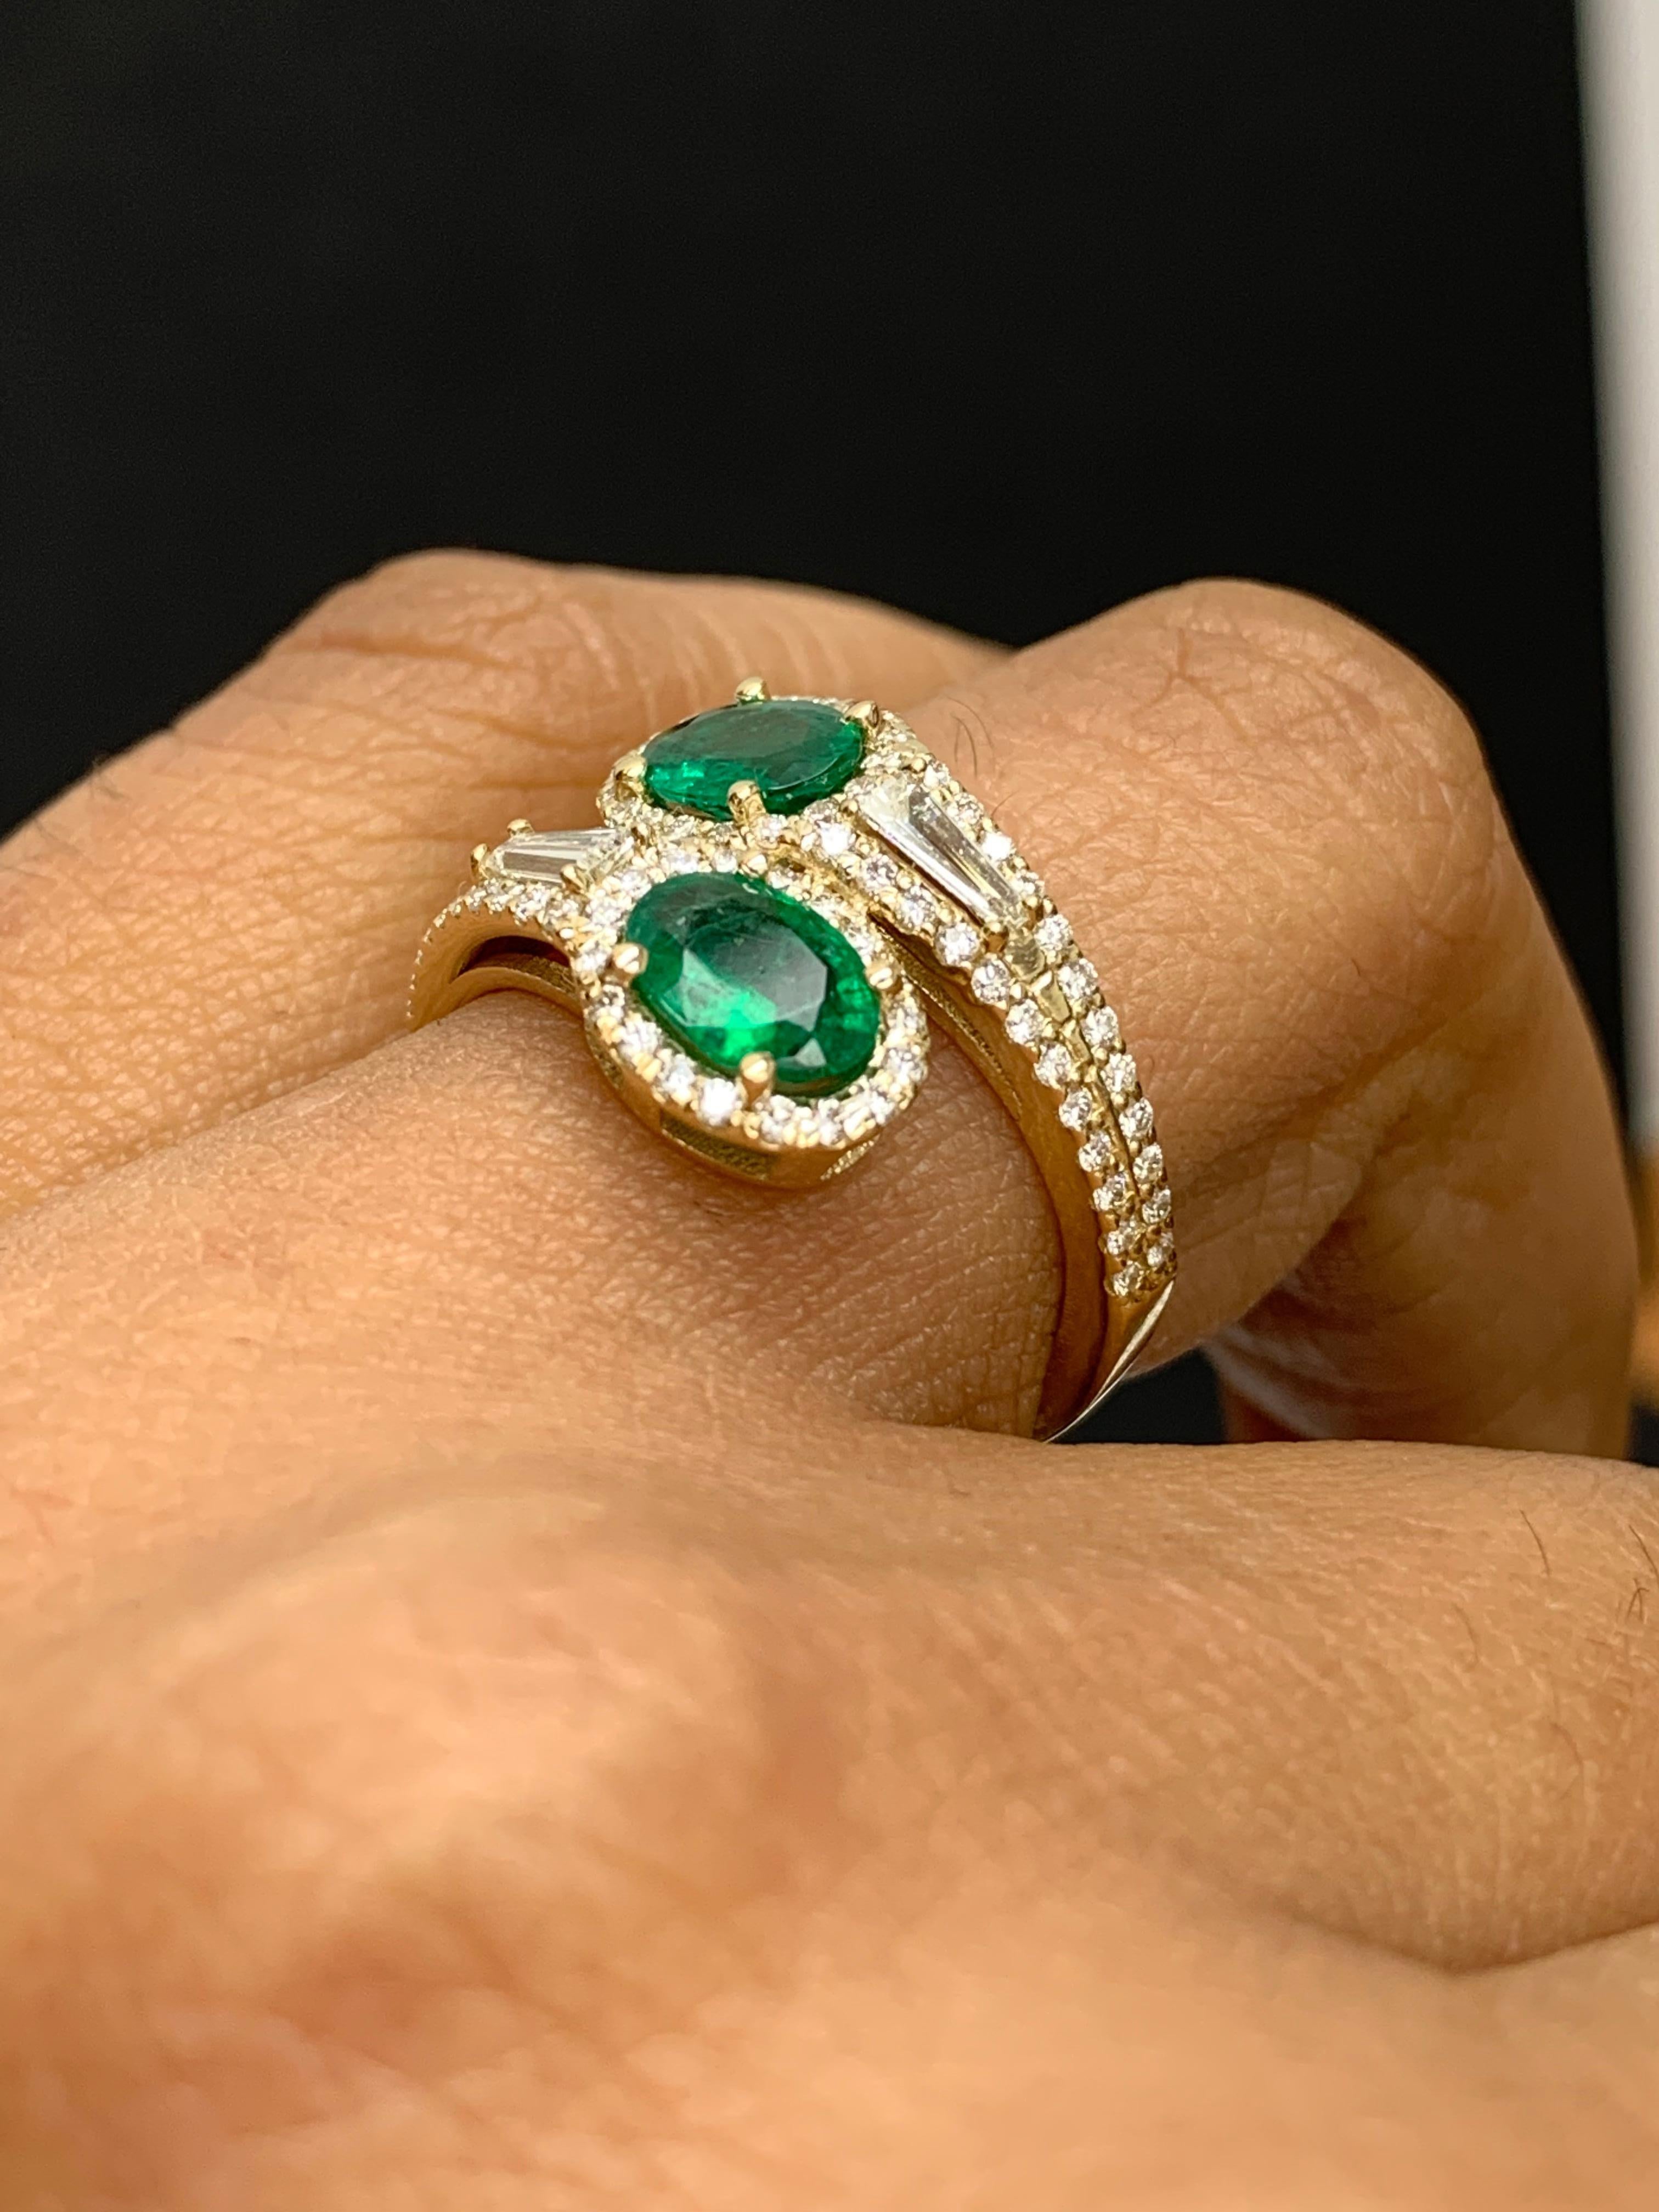 1.52 Carat Oval Cut Emerald Diamond Toi Et Moi Engagement Ring 14K Yellow Gold For Sale 8